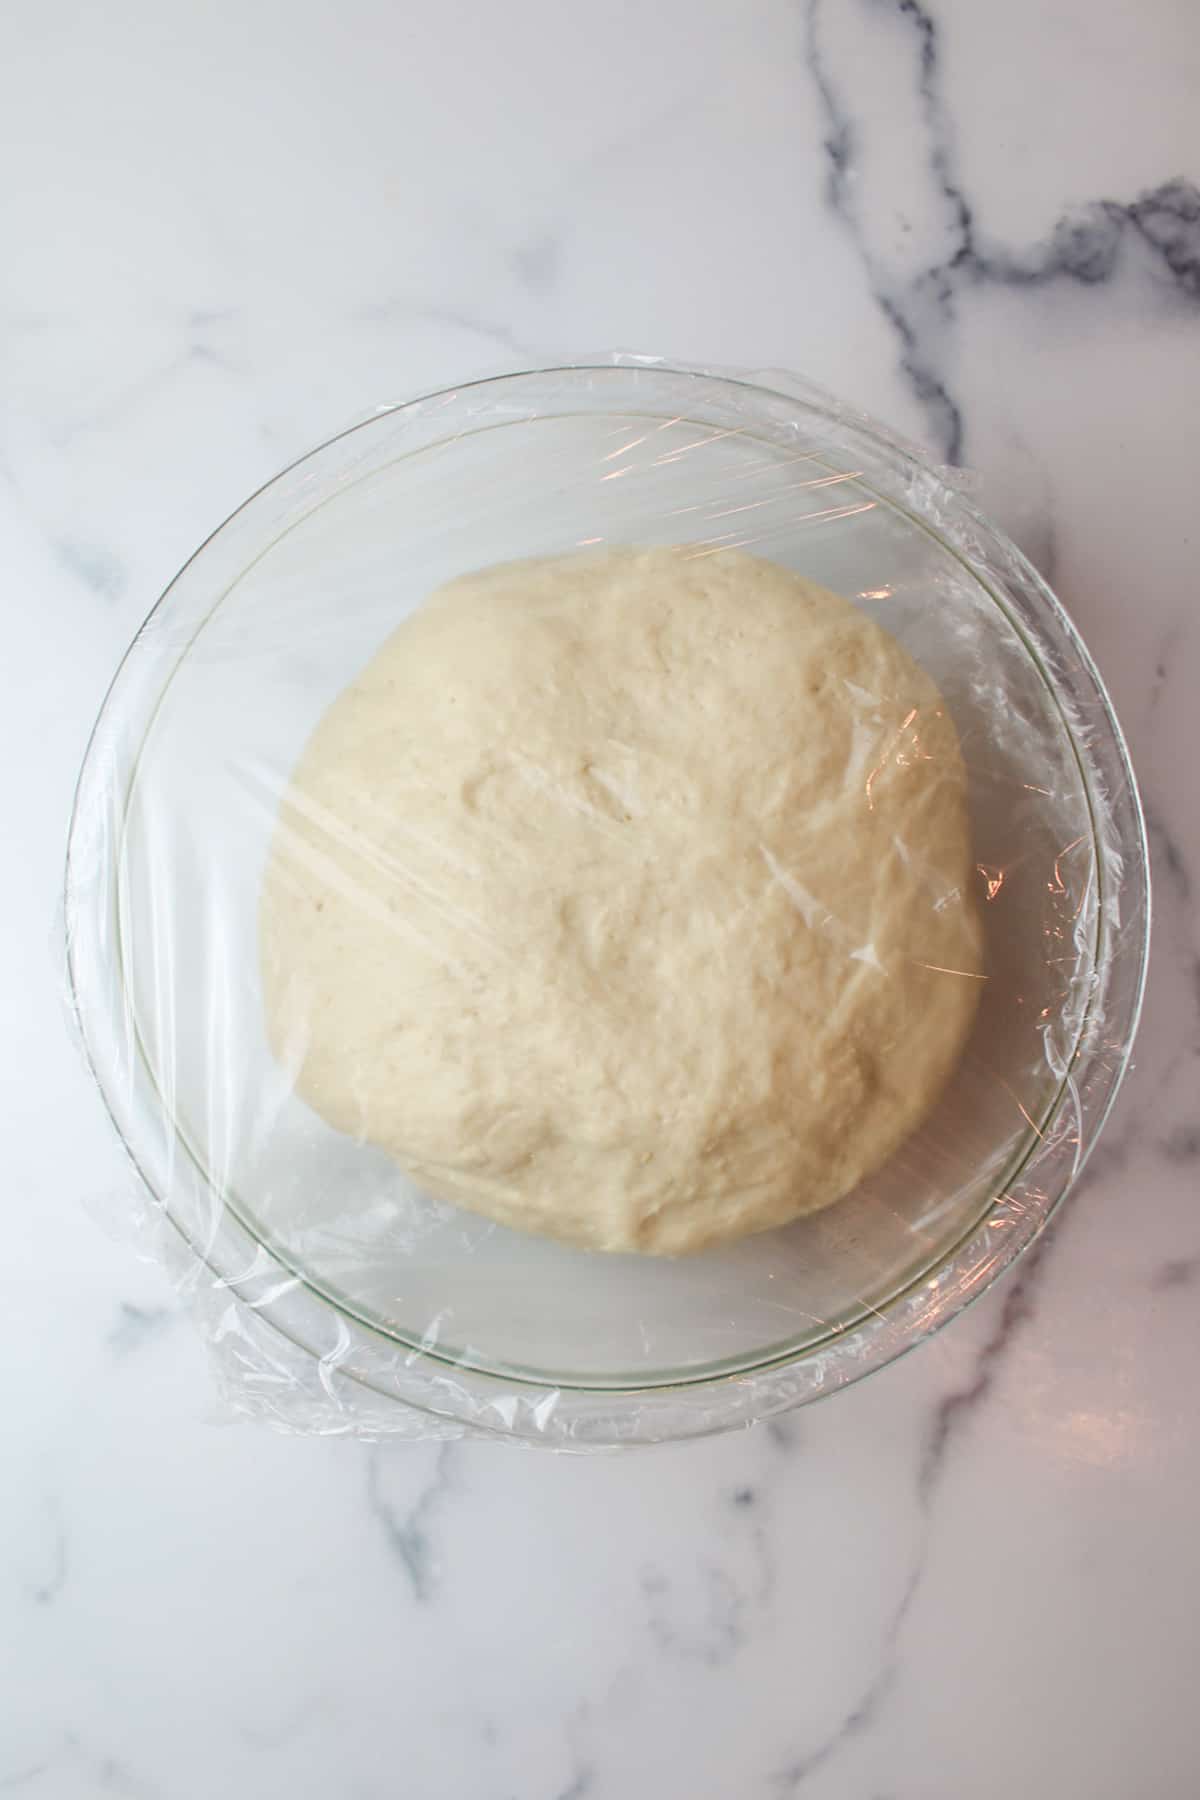 proofed dough in a mixing bowl topped with plastic wrap.